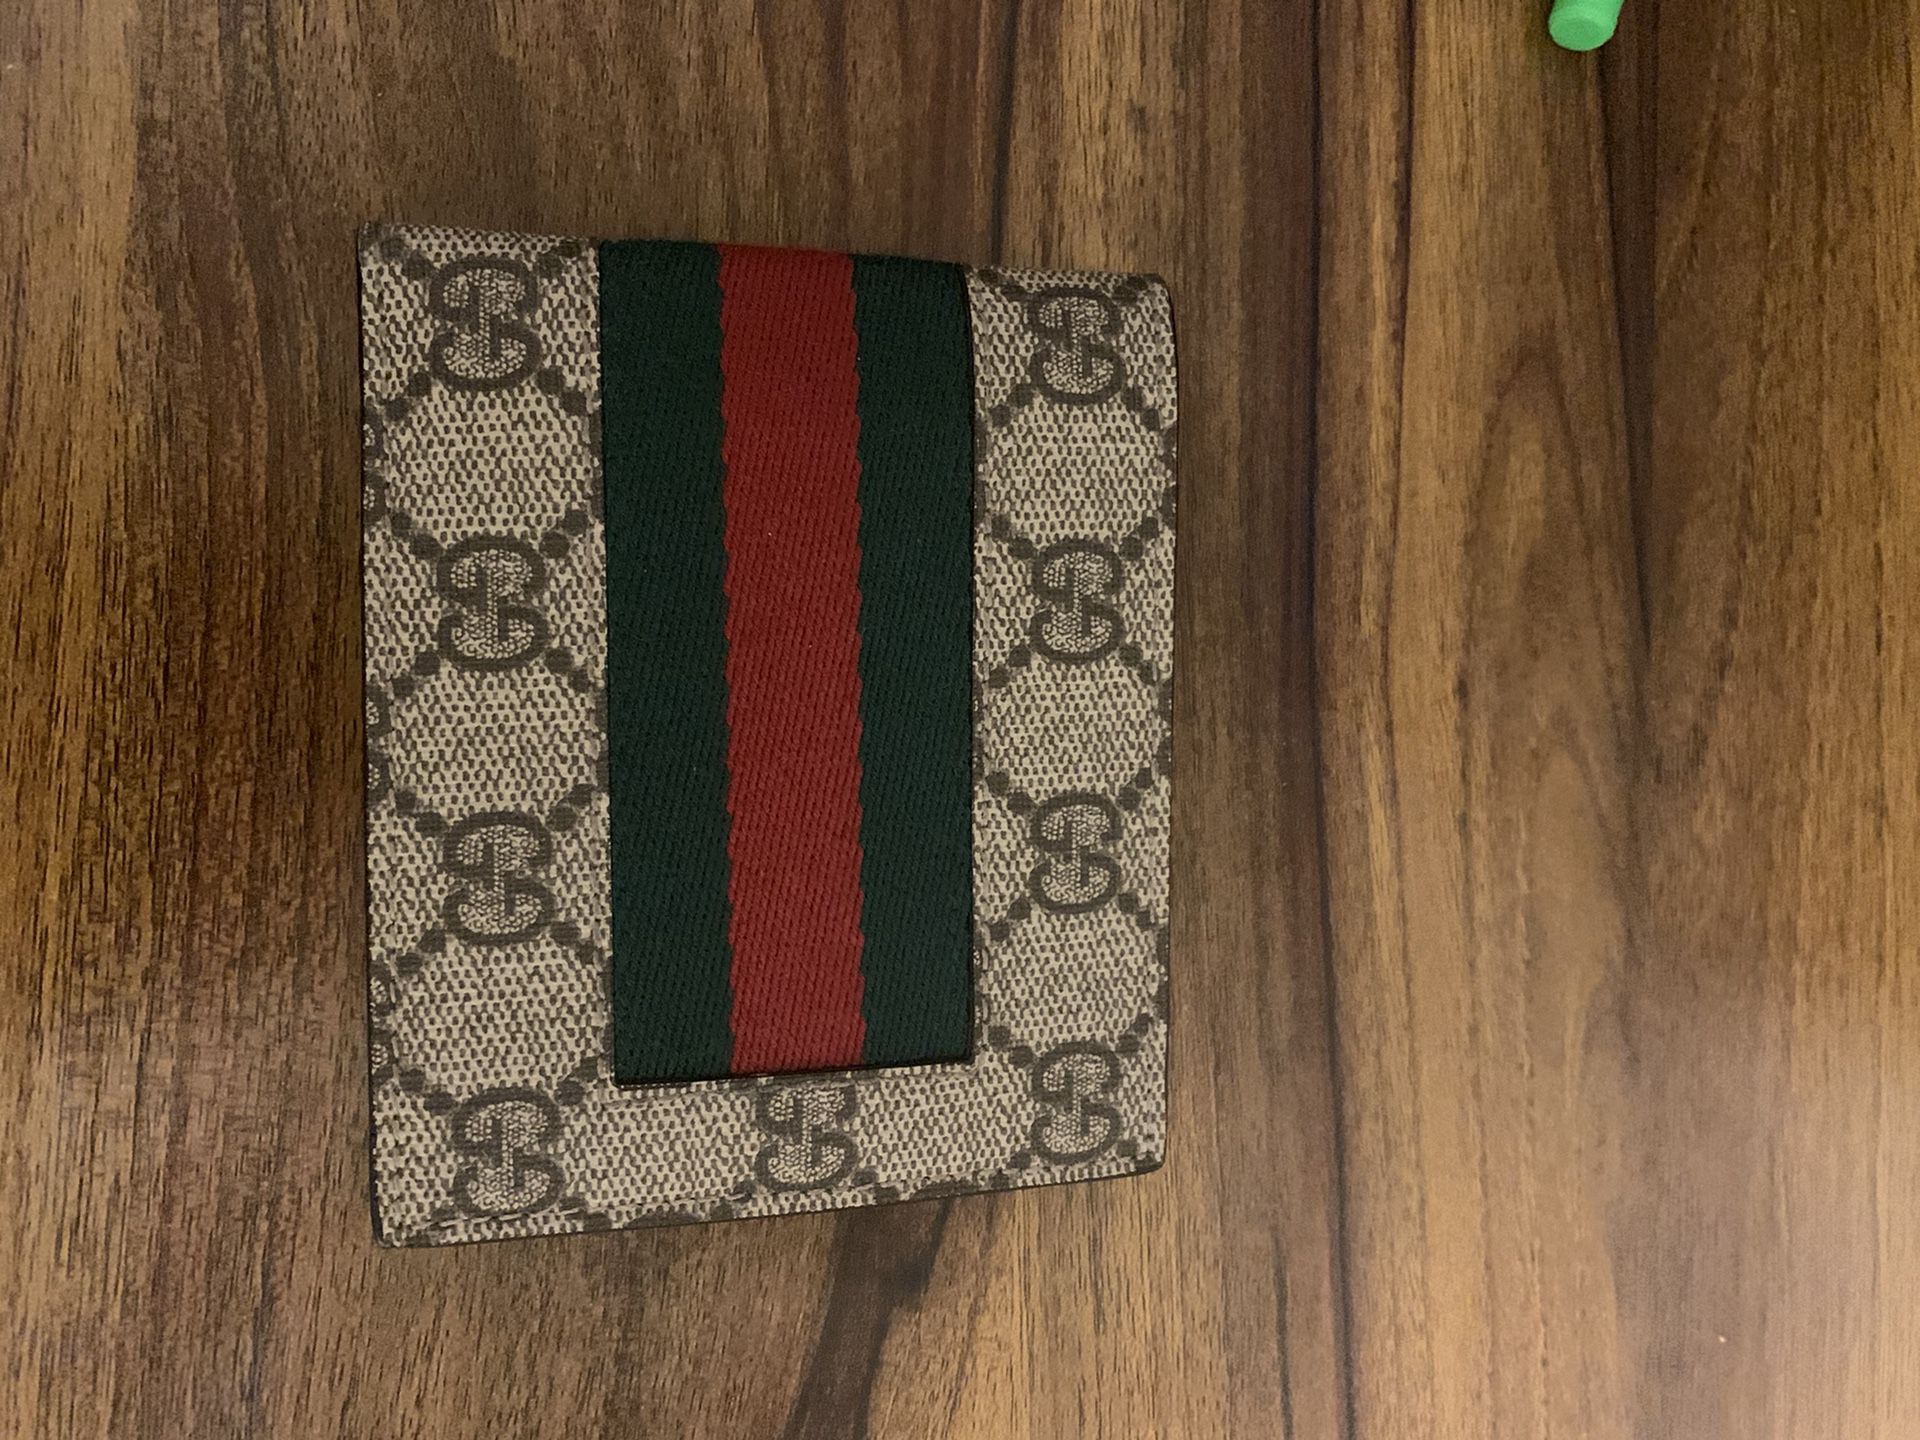 Gucci wallet - never used